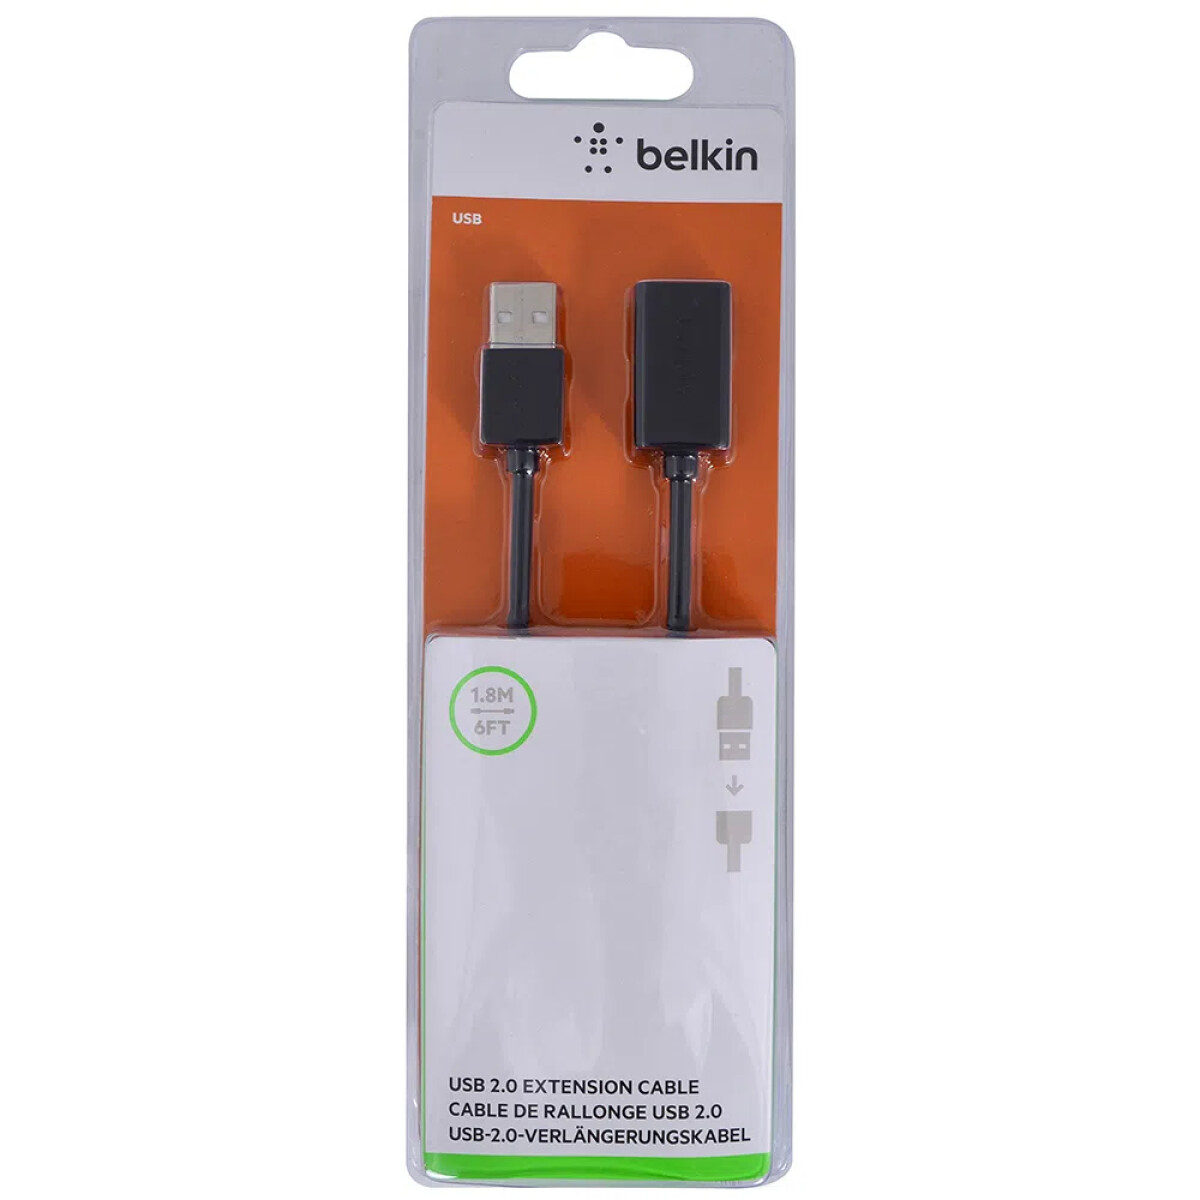 Belkin F3U153BY1.8 Cable Extension USB A/A 1.8M Gris - Belkin F3u153by1.8 Cable Extension Usb A/a 1.8m Gris 